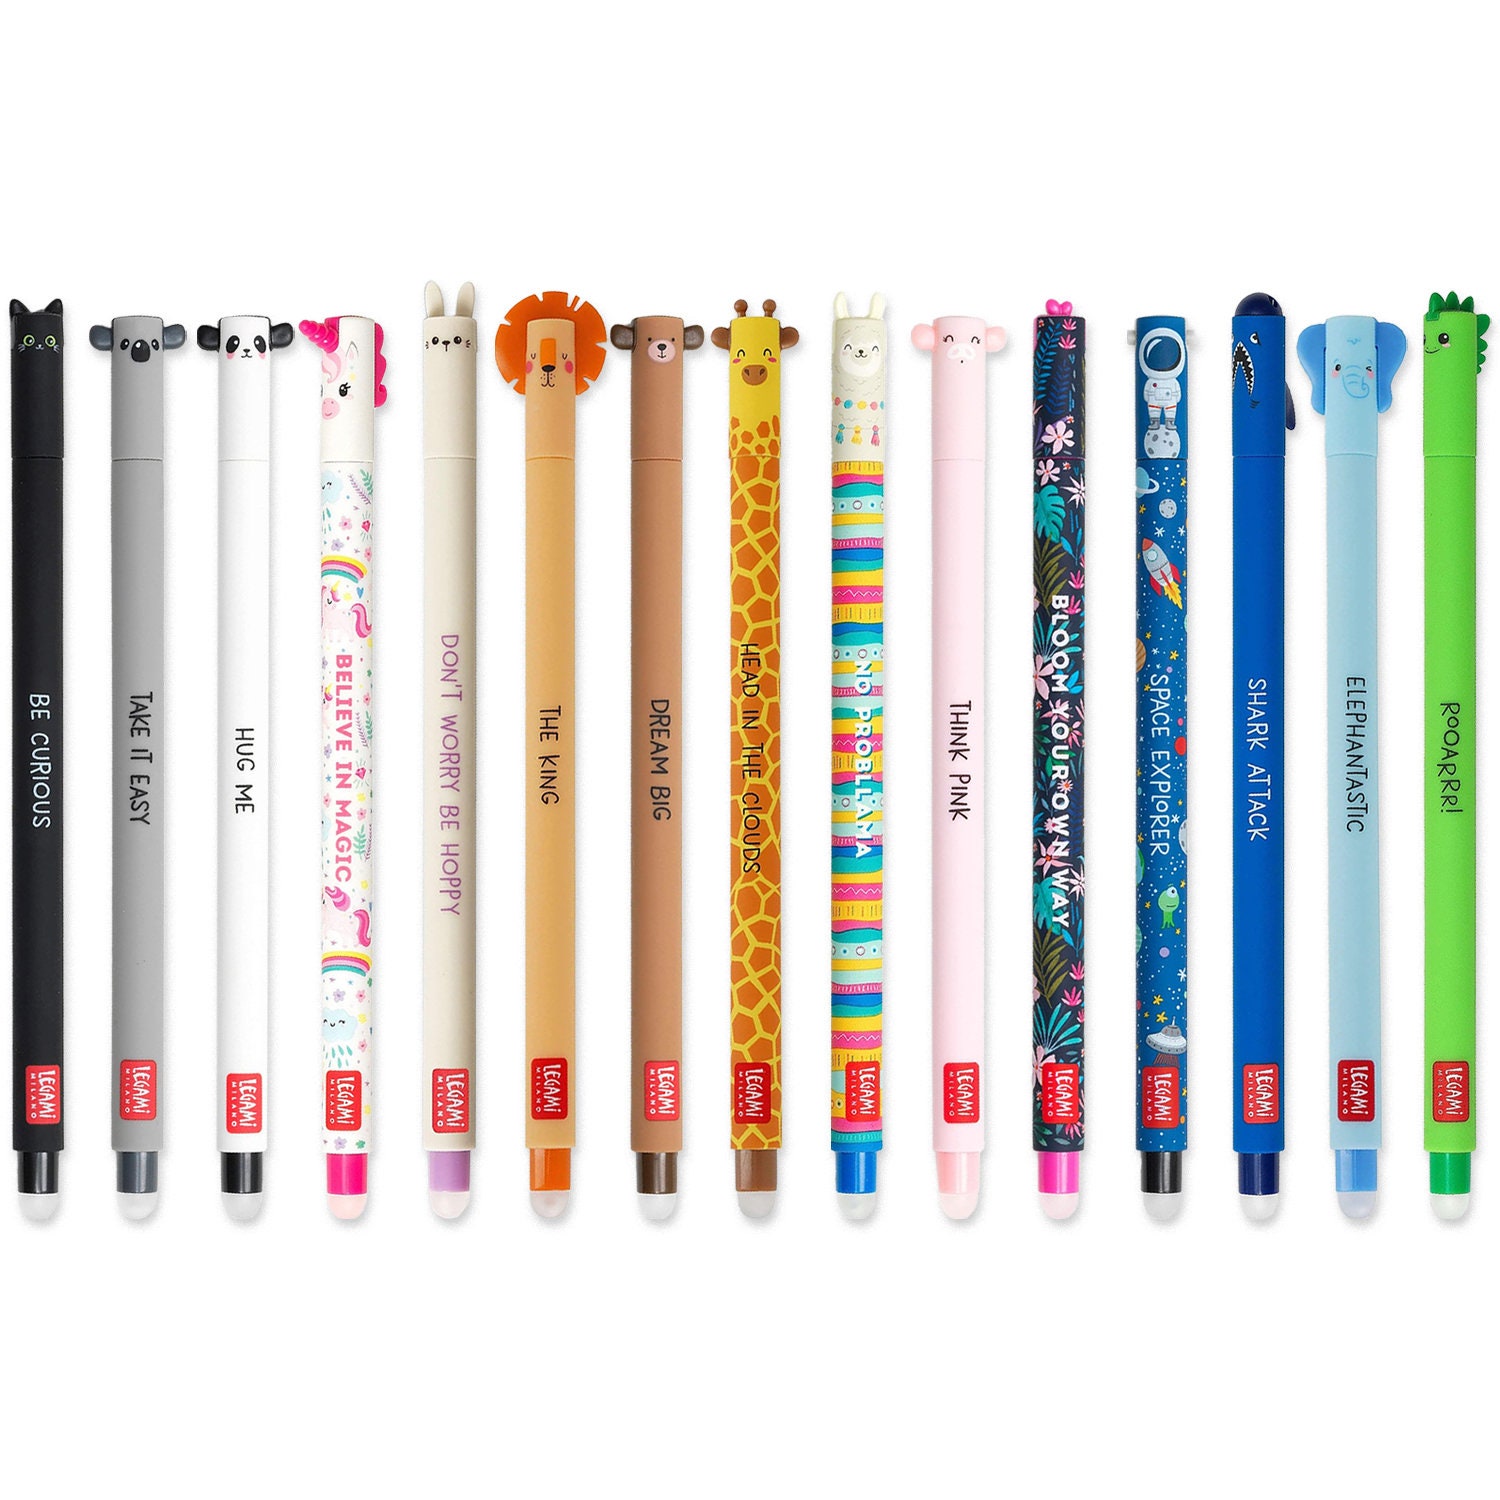 Erasable Pens Legami Milano Animal/floral/astronaut Themed Pens  Thermosensitive Ink 0.7mm Tip Fun Collectable Pens Various Packs 